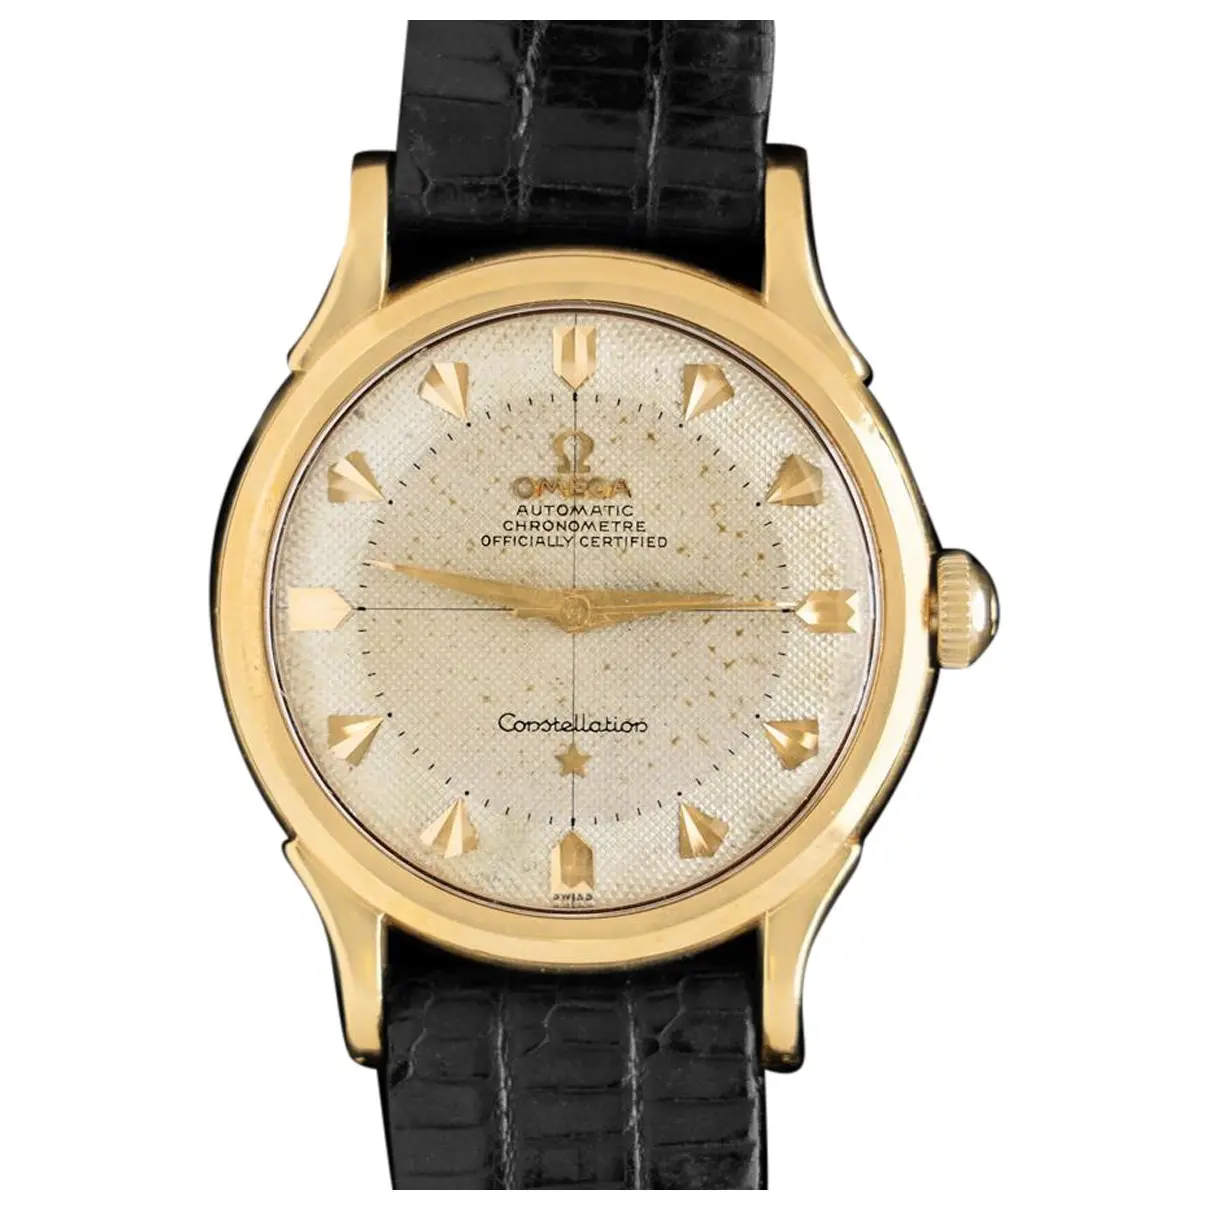 Constellation gold watch Omega